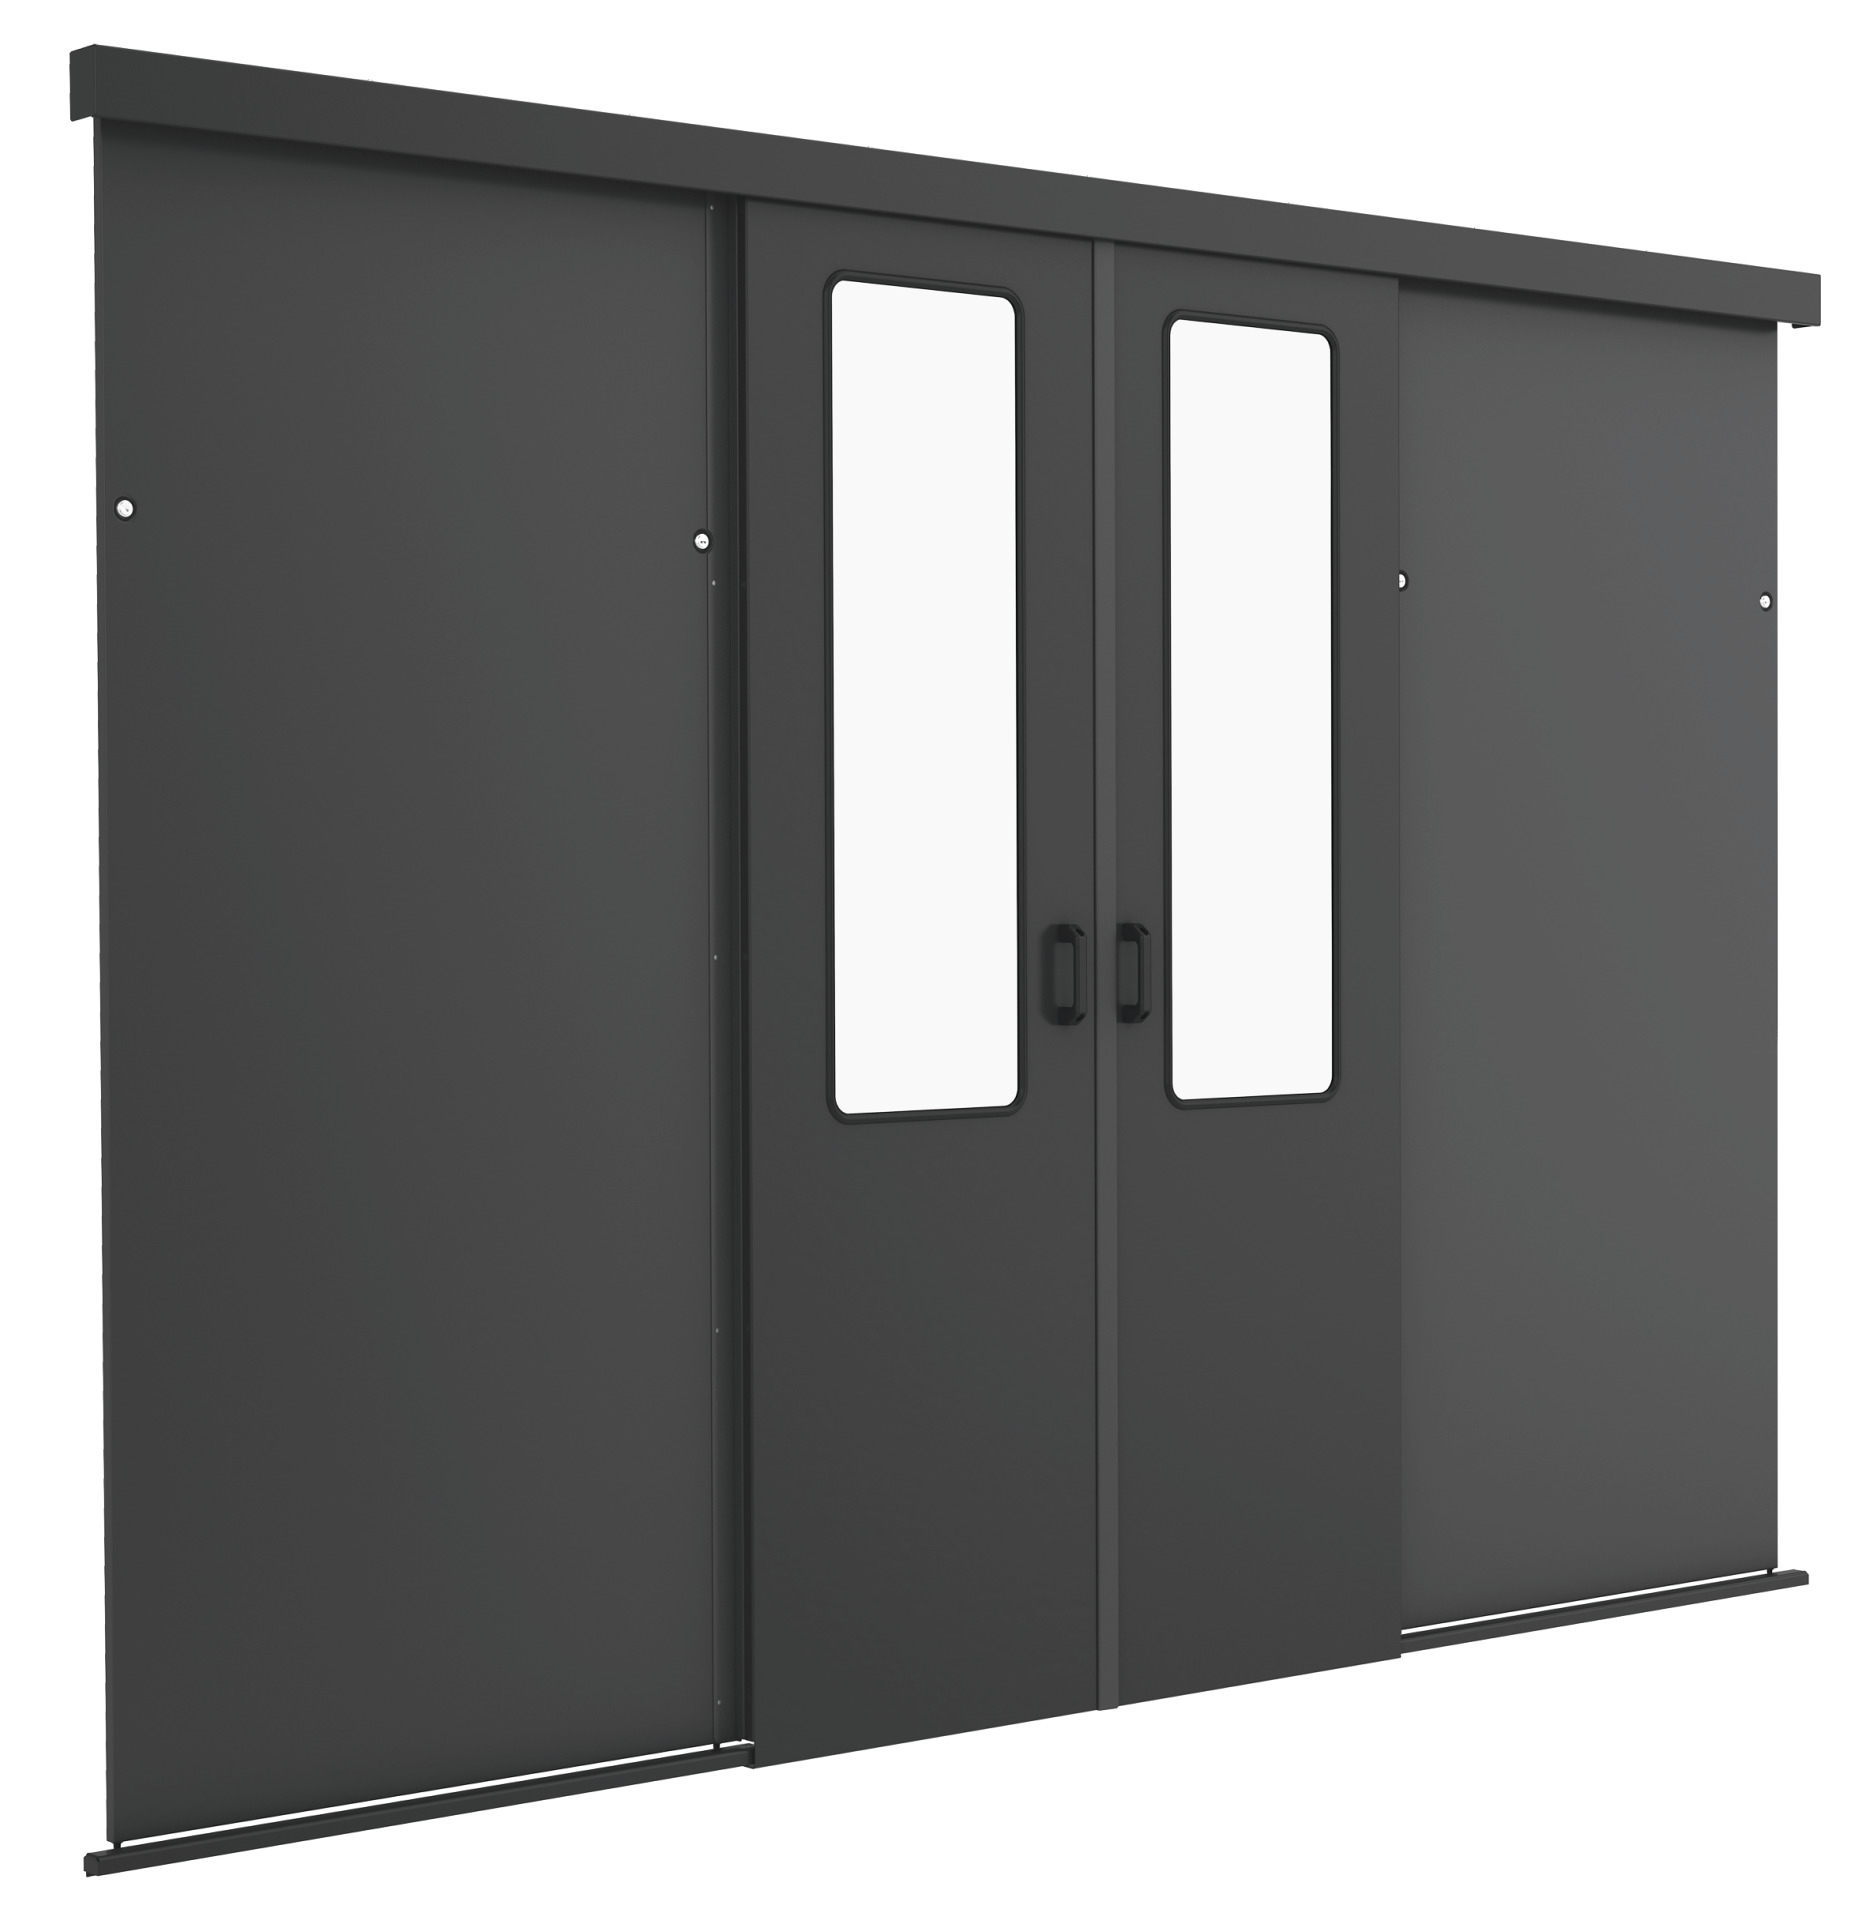 Slidiung Door for Cold/Warm Aisle for PRO 47U, 1200 mm, RAL7035